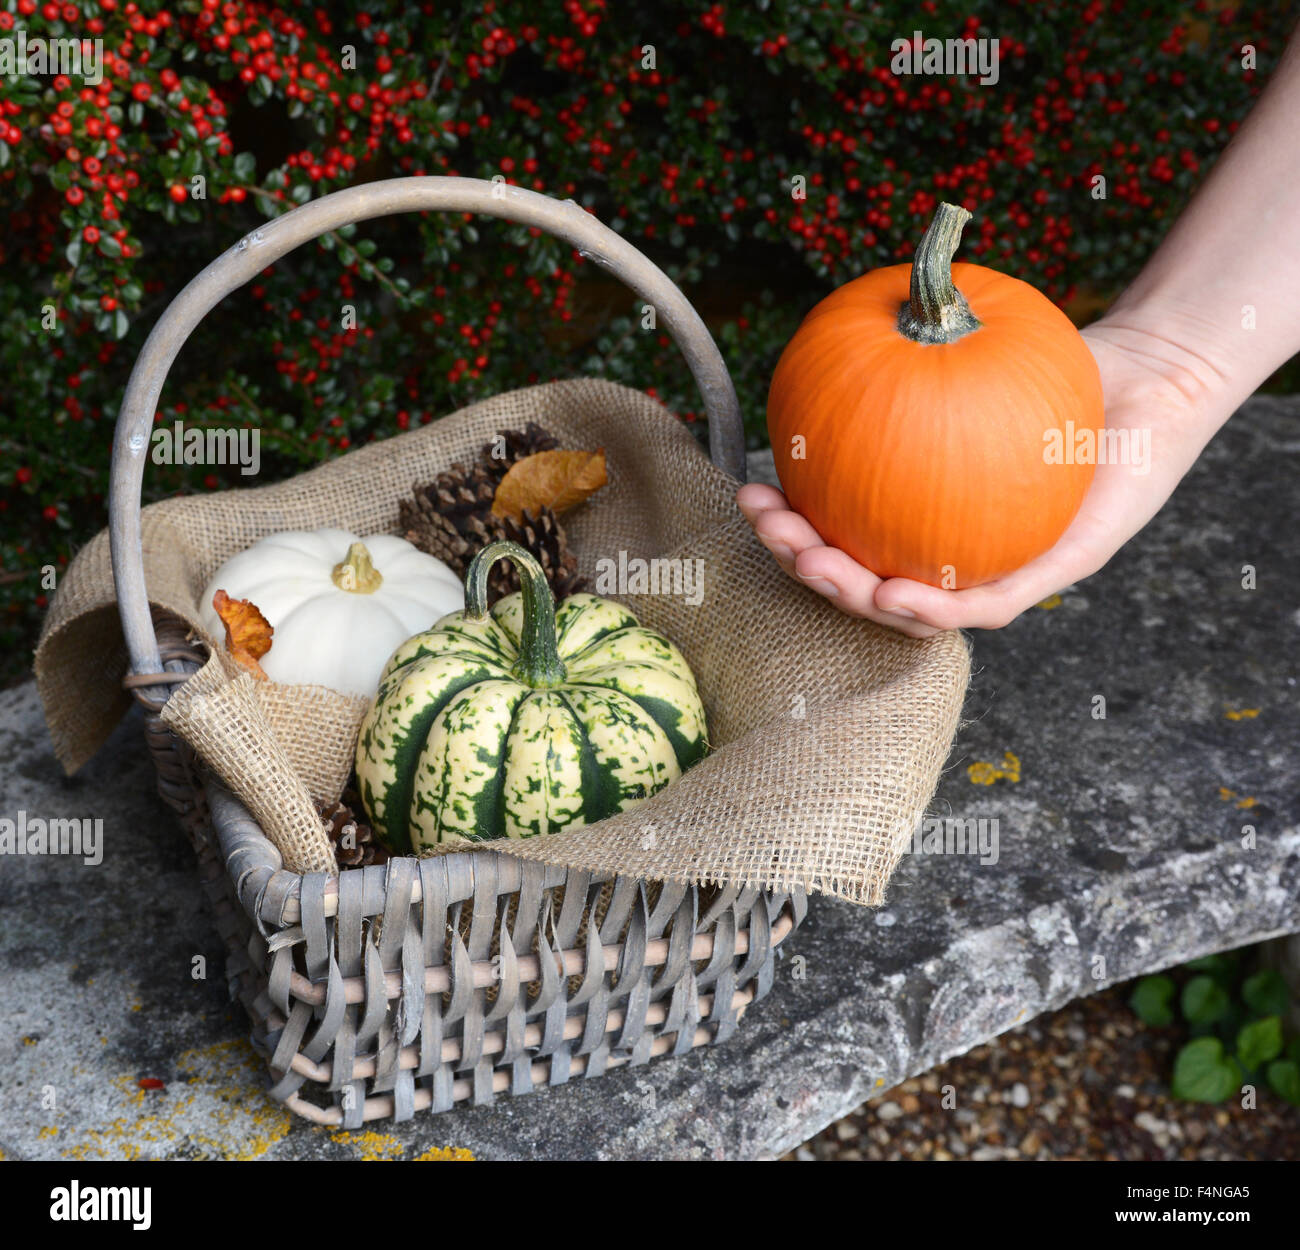 Woman holds small pumpkin in her hand next to a basket of fall gourds on a stone bench Stock Photo